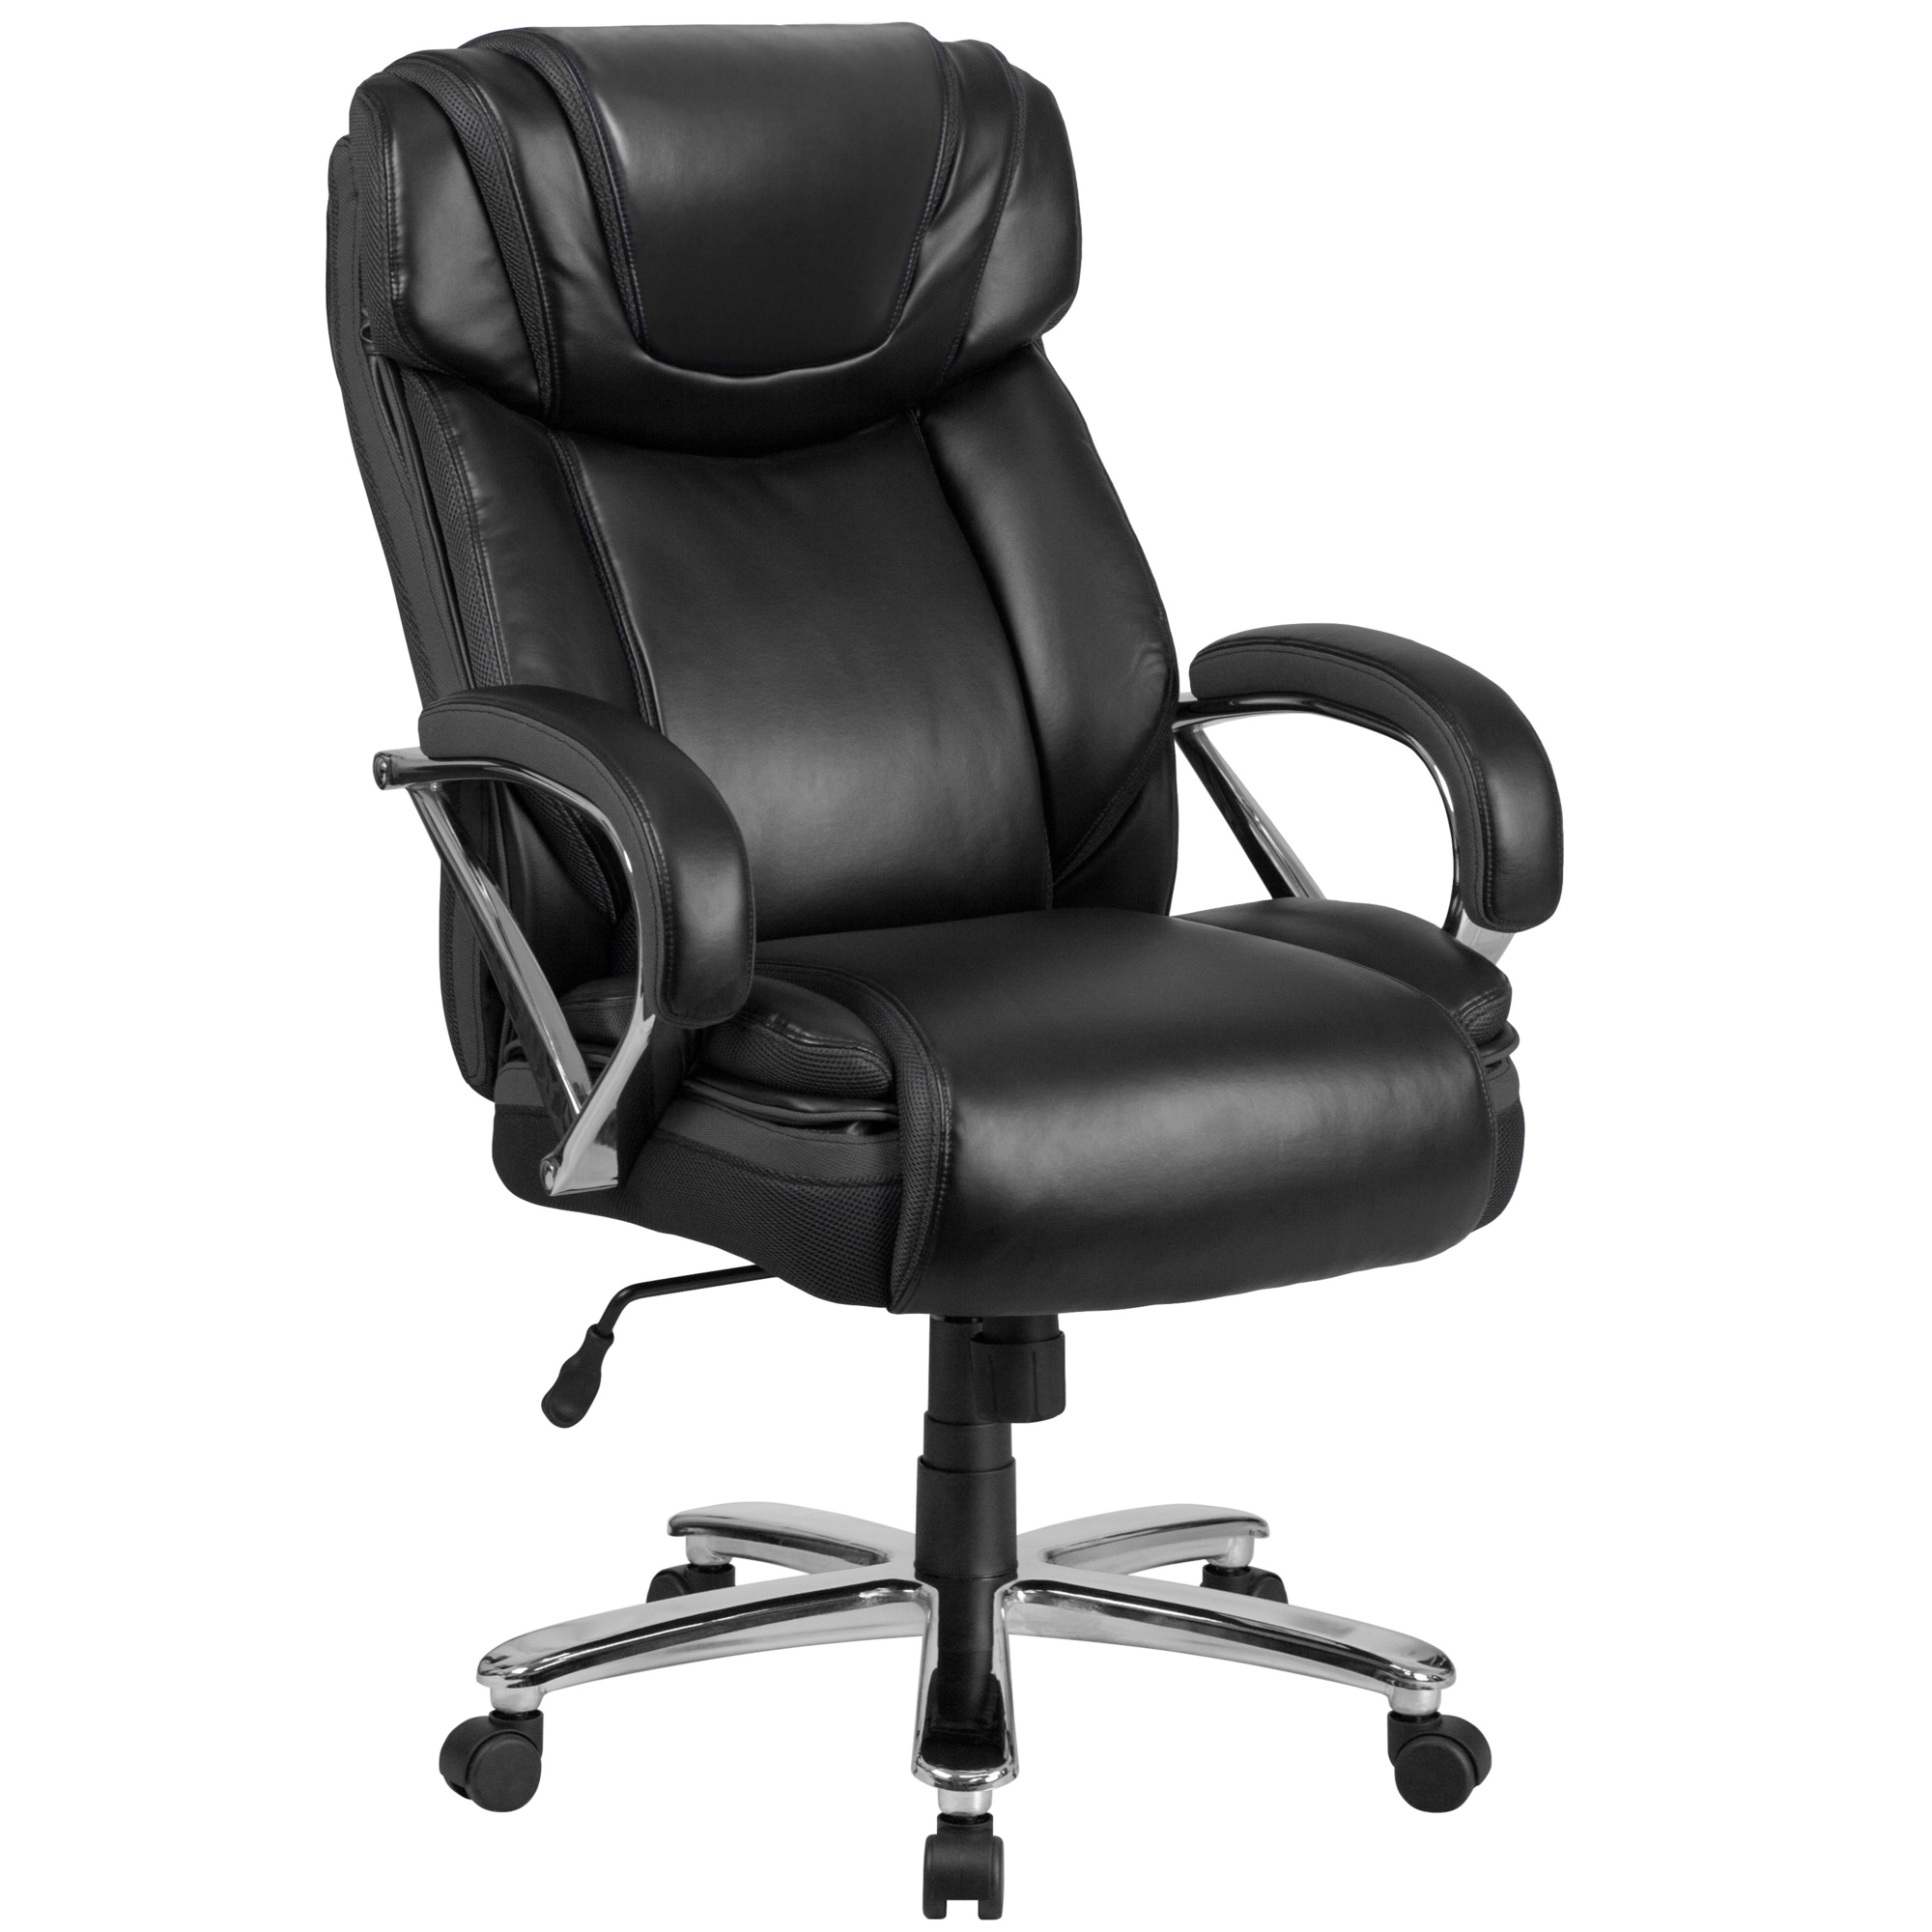 Flash Furniture, 500 lb. Rated Black LeatherSoft Extra Wide Chair, Primary Color Black, Included (qty.) 1, Model GO2092M1BK